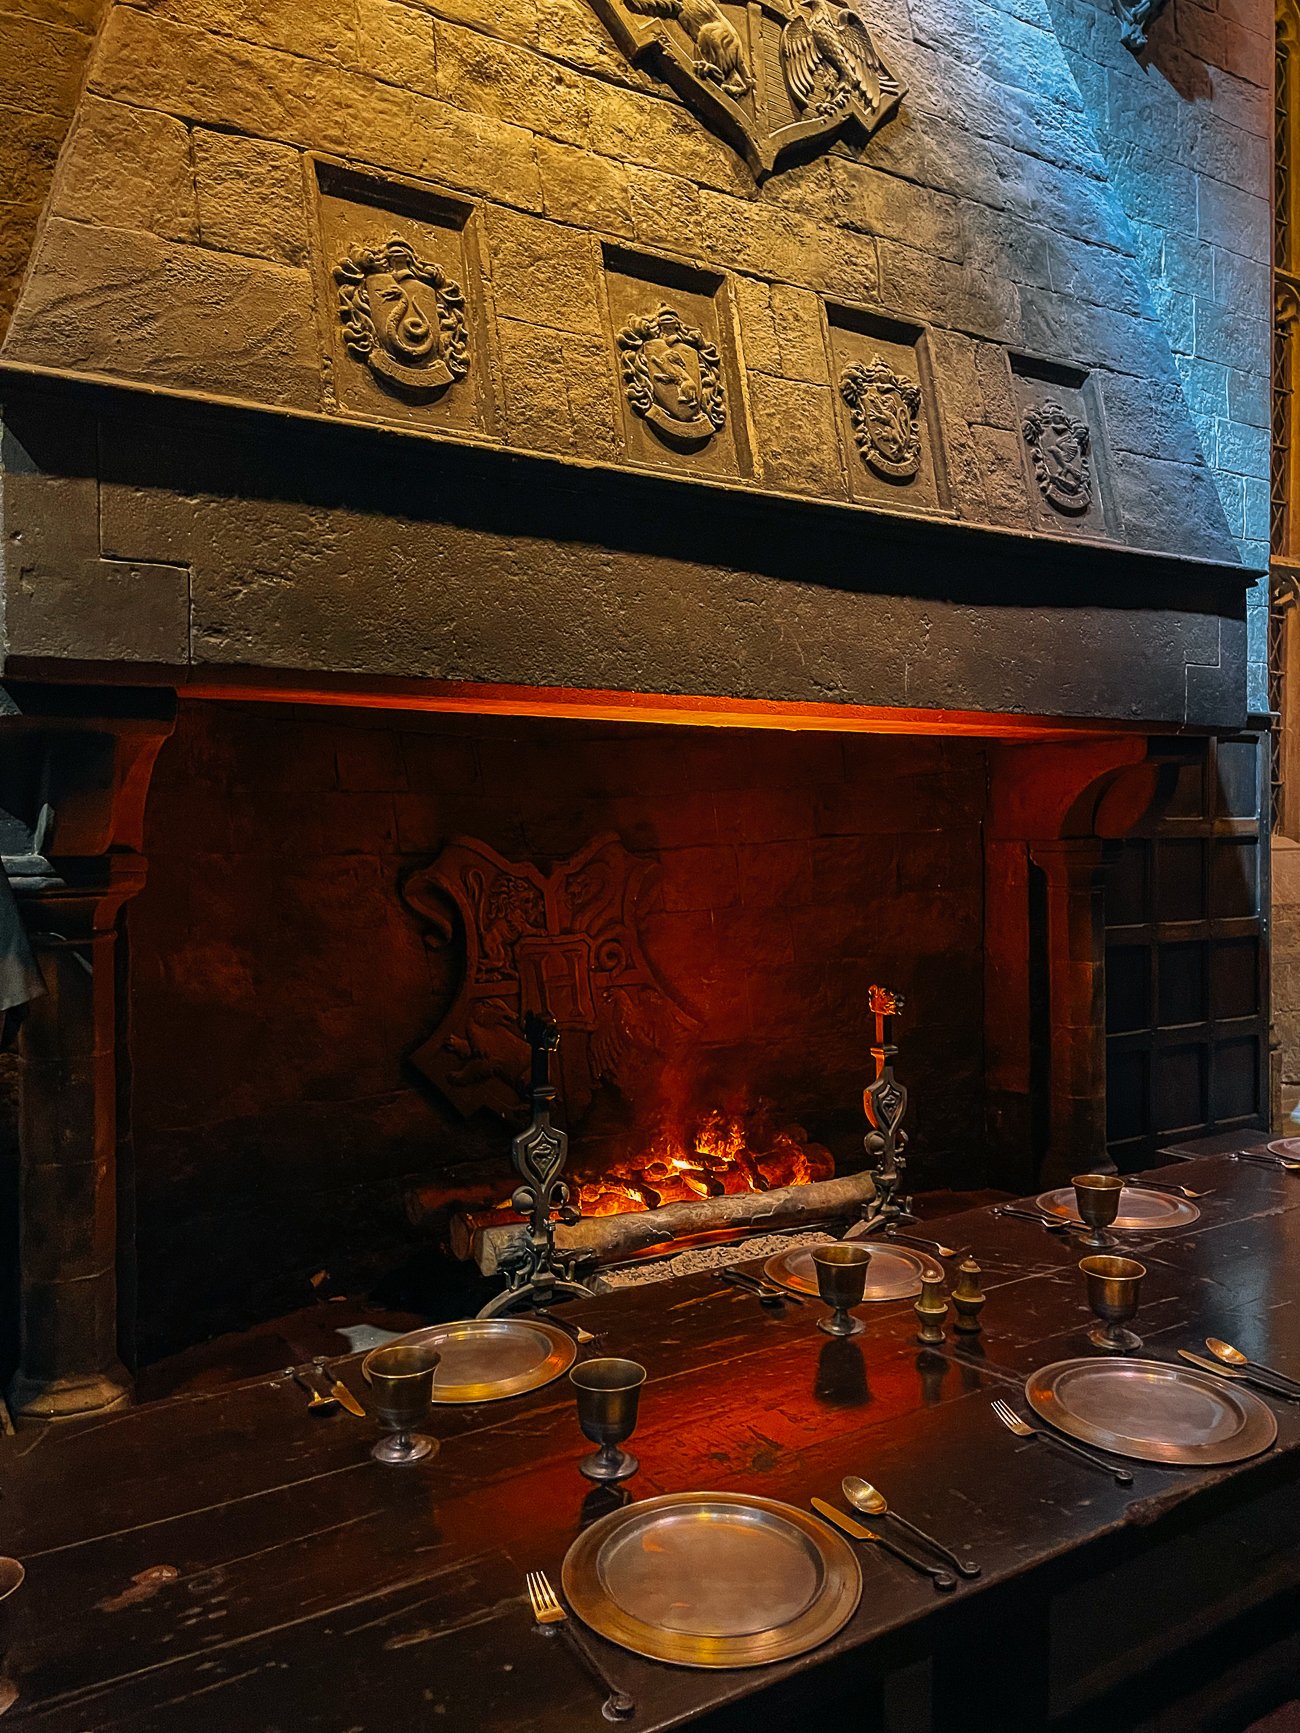 Giant fireplace in the Great Hall at Harry Potter studio tour